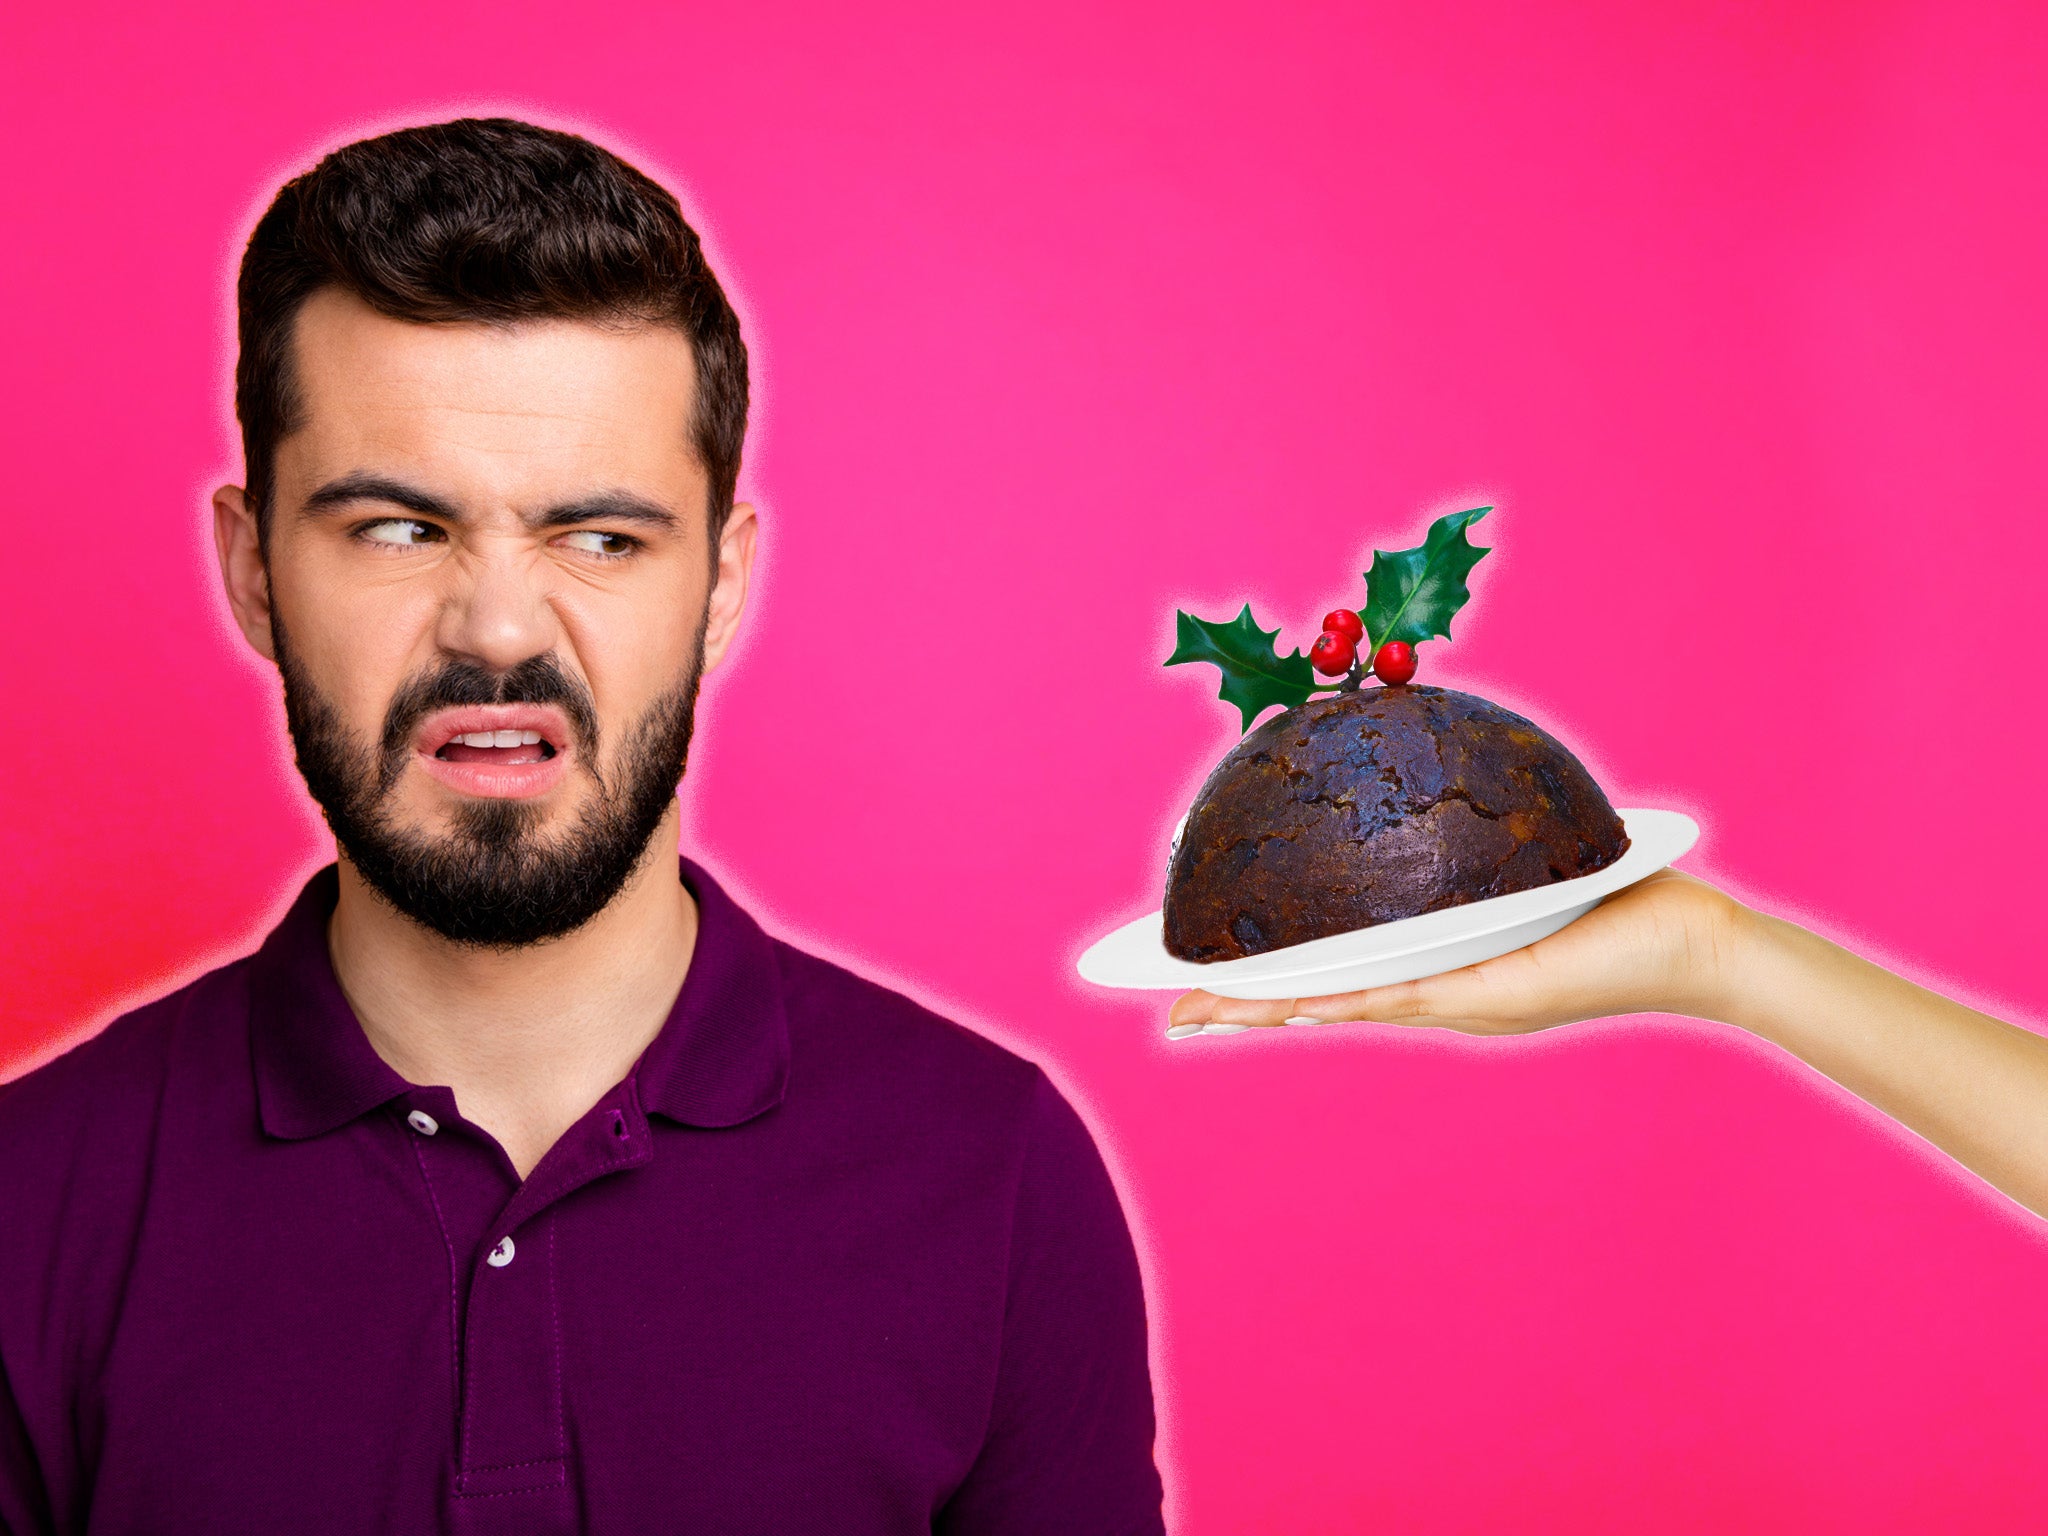 It seems the Christmas pudding is as divisive as it is misunderstood